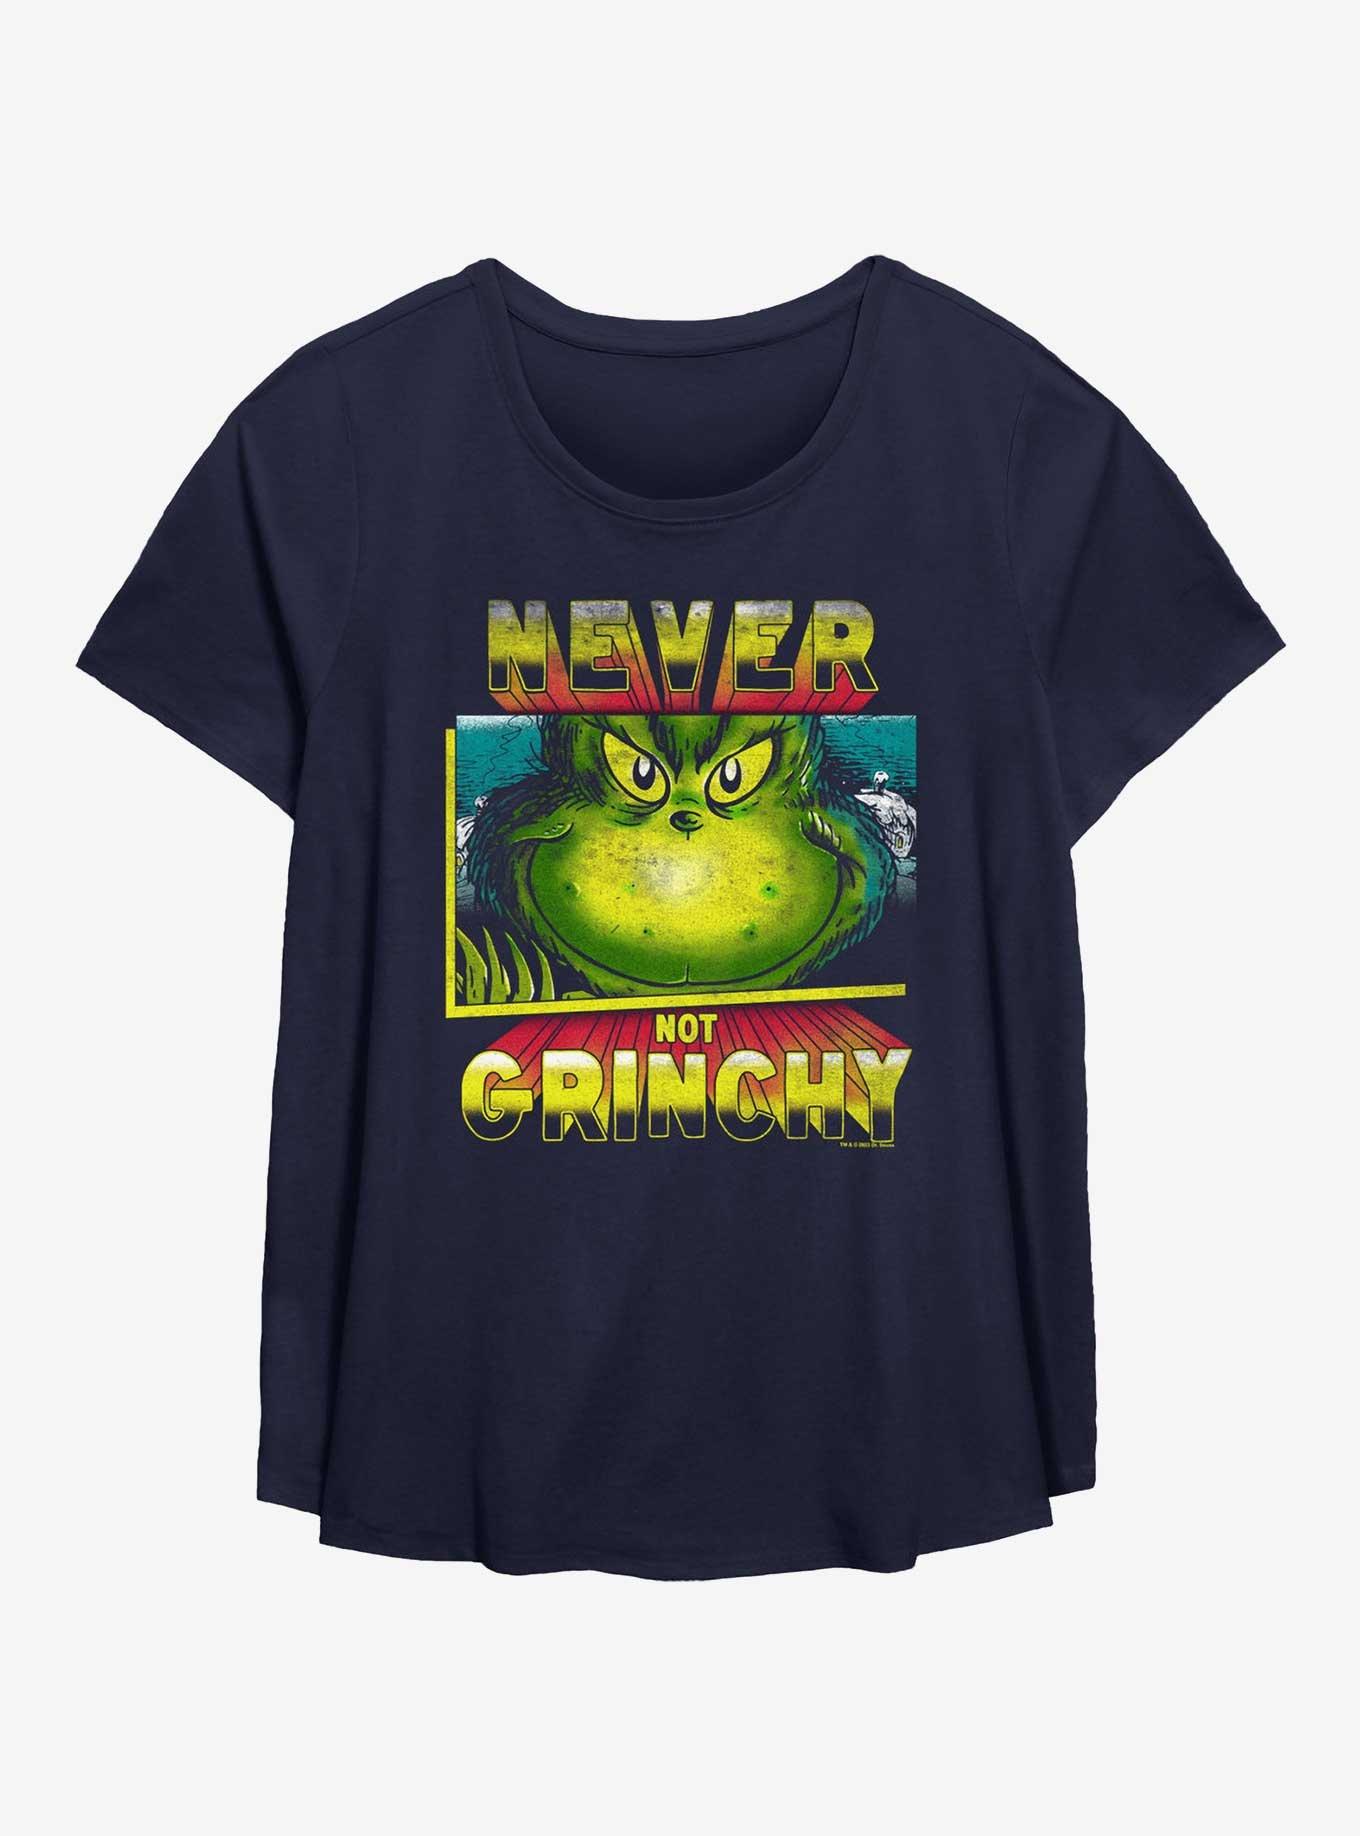 Dr. Seuss How The Grinch Stole Christmas Never Not Grinchy Girls T-Shirt Plus Size, NAVY, hi-res